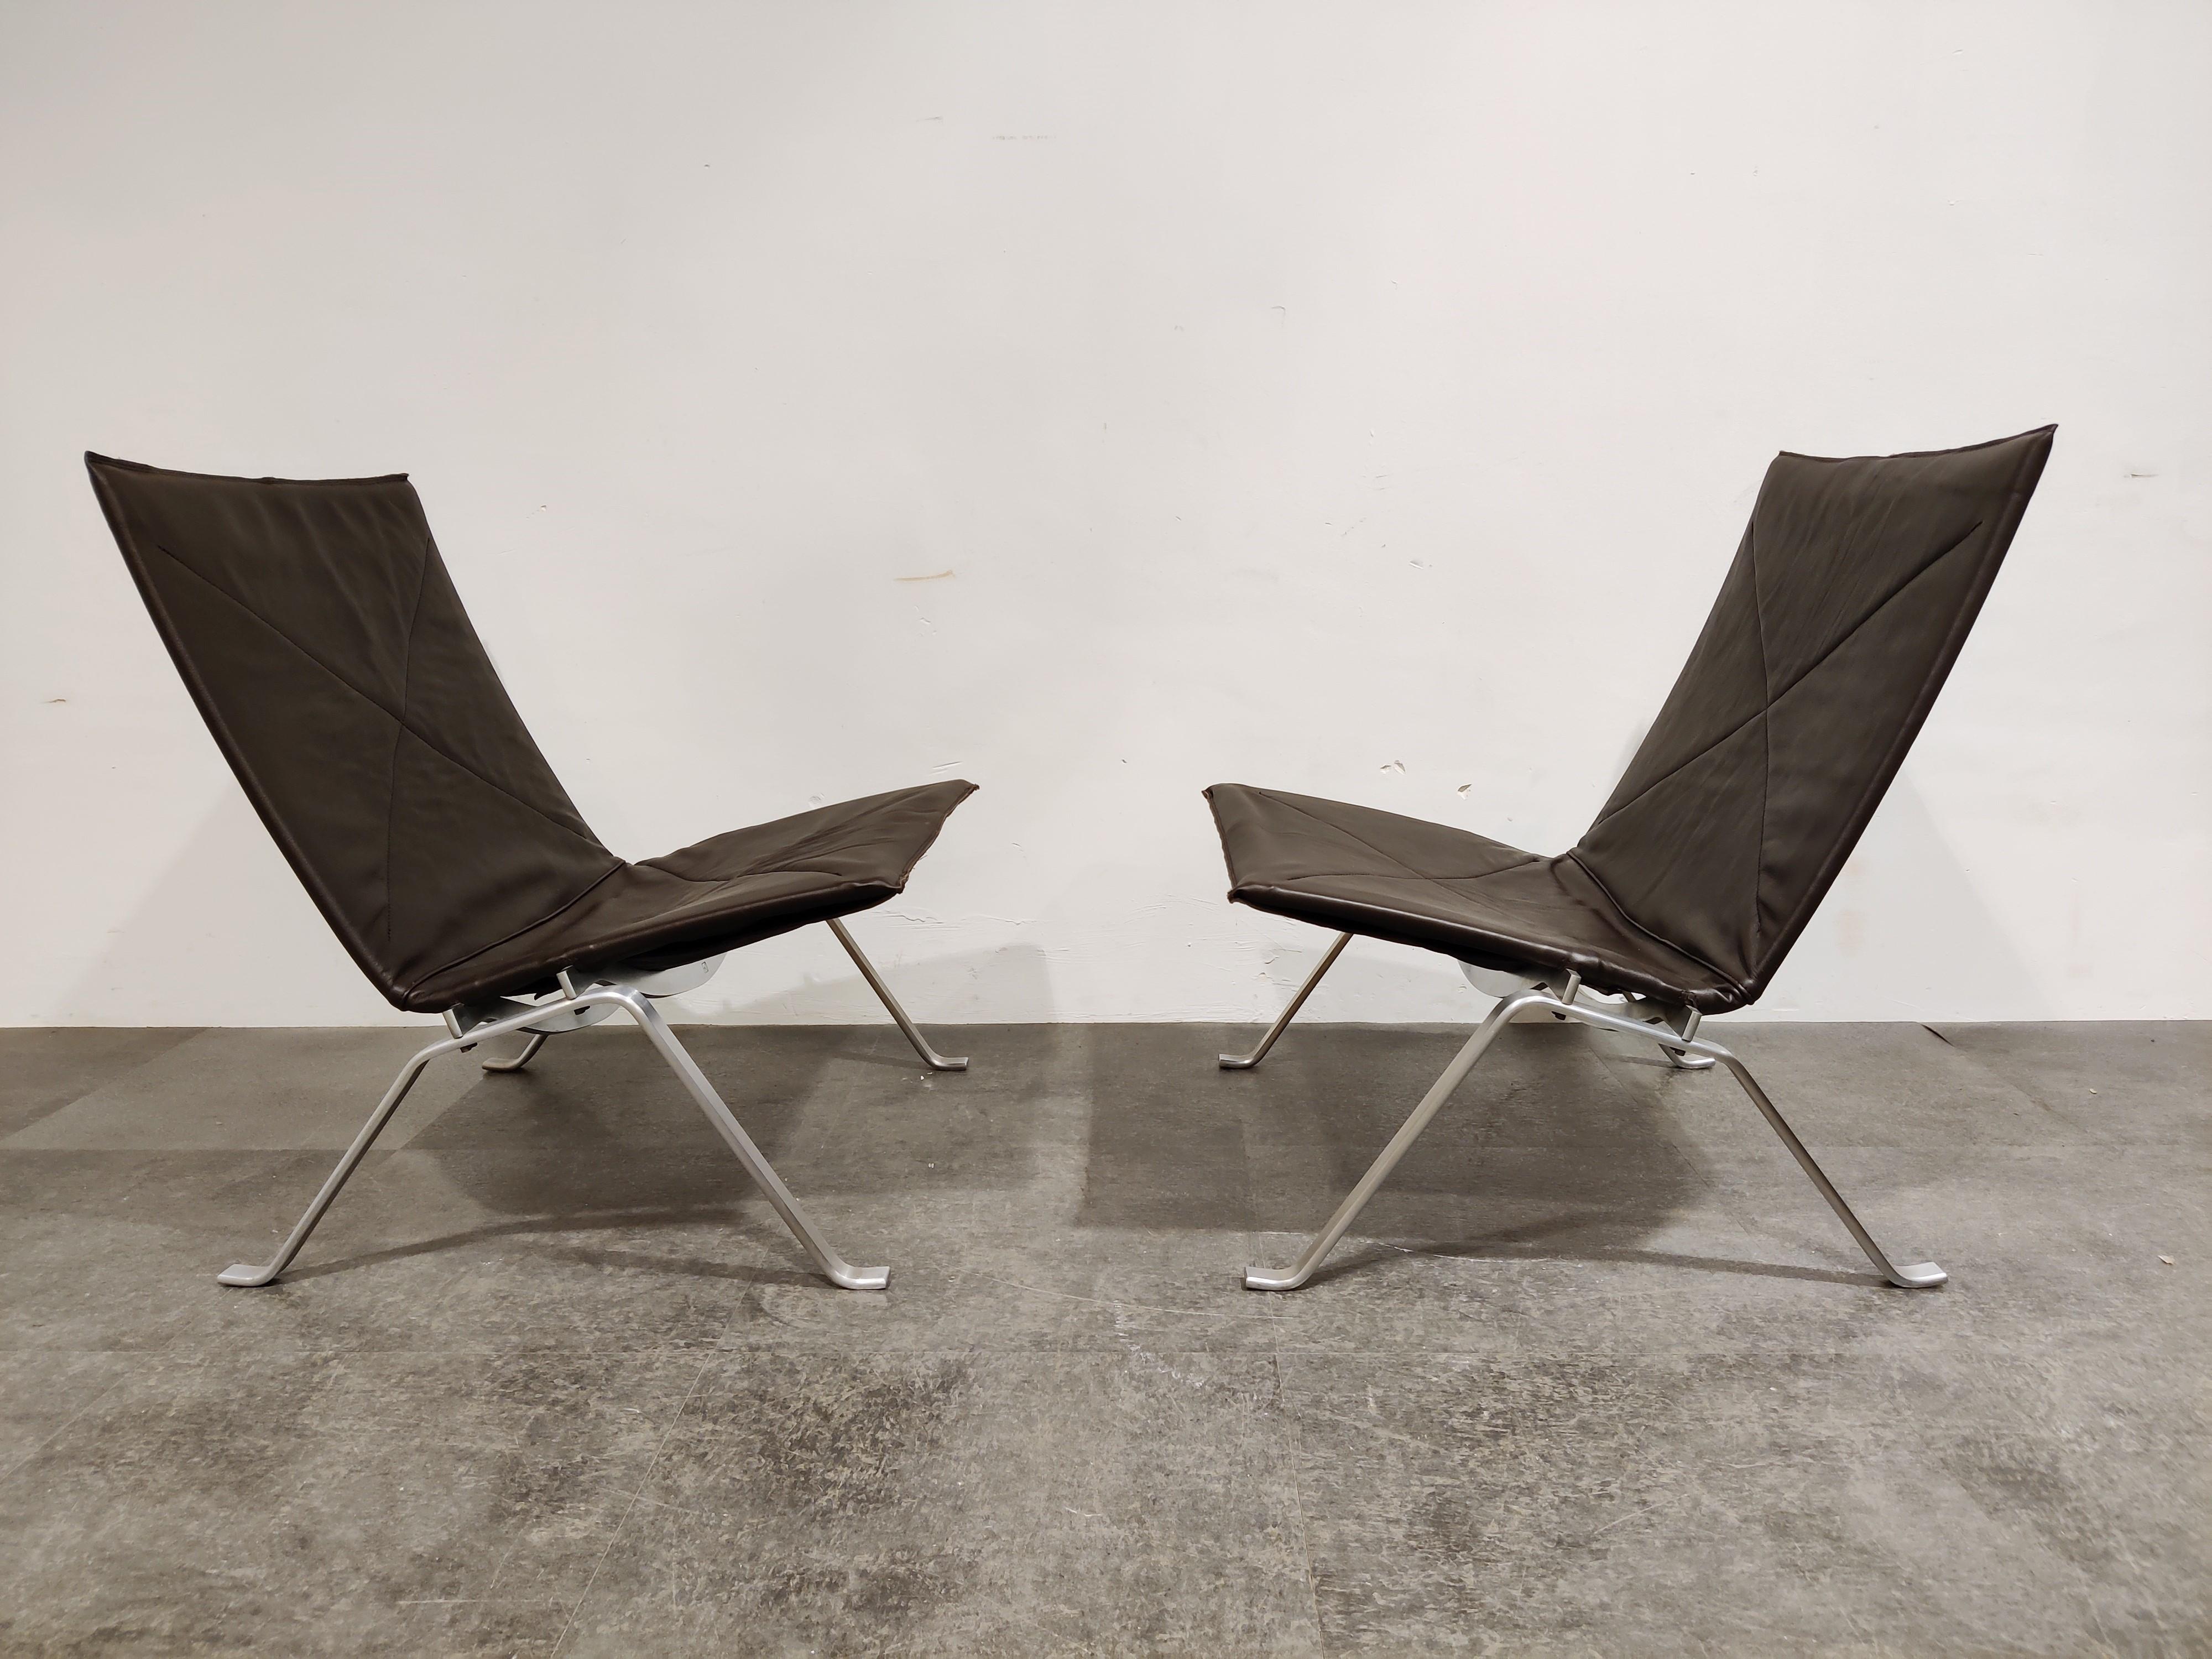 Stainless Steel Vintage PK 22 Lounge Chairs by Poul Kjærholm for E. Kold Christensen, Set of 2